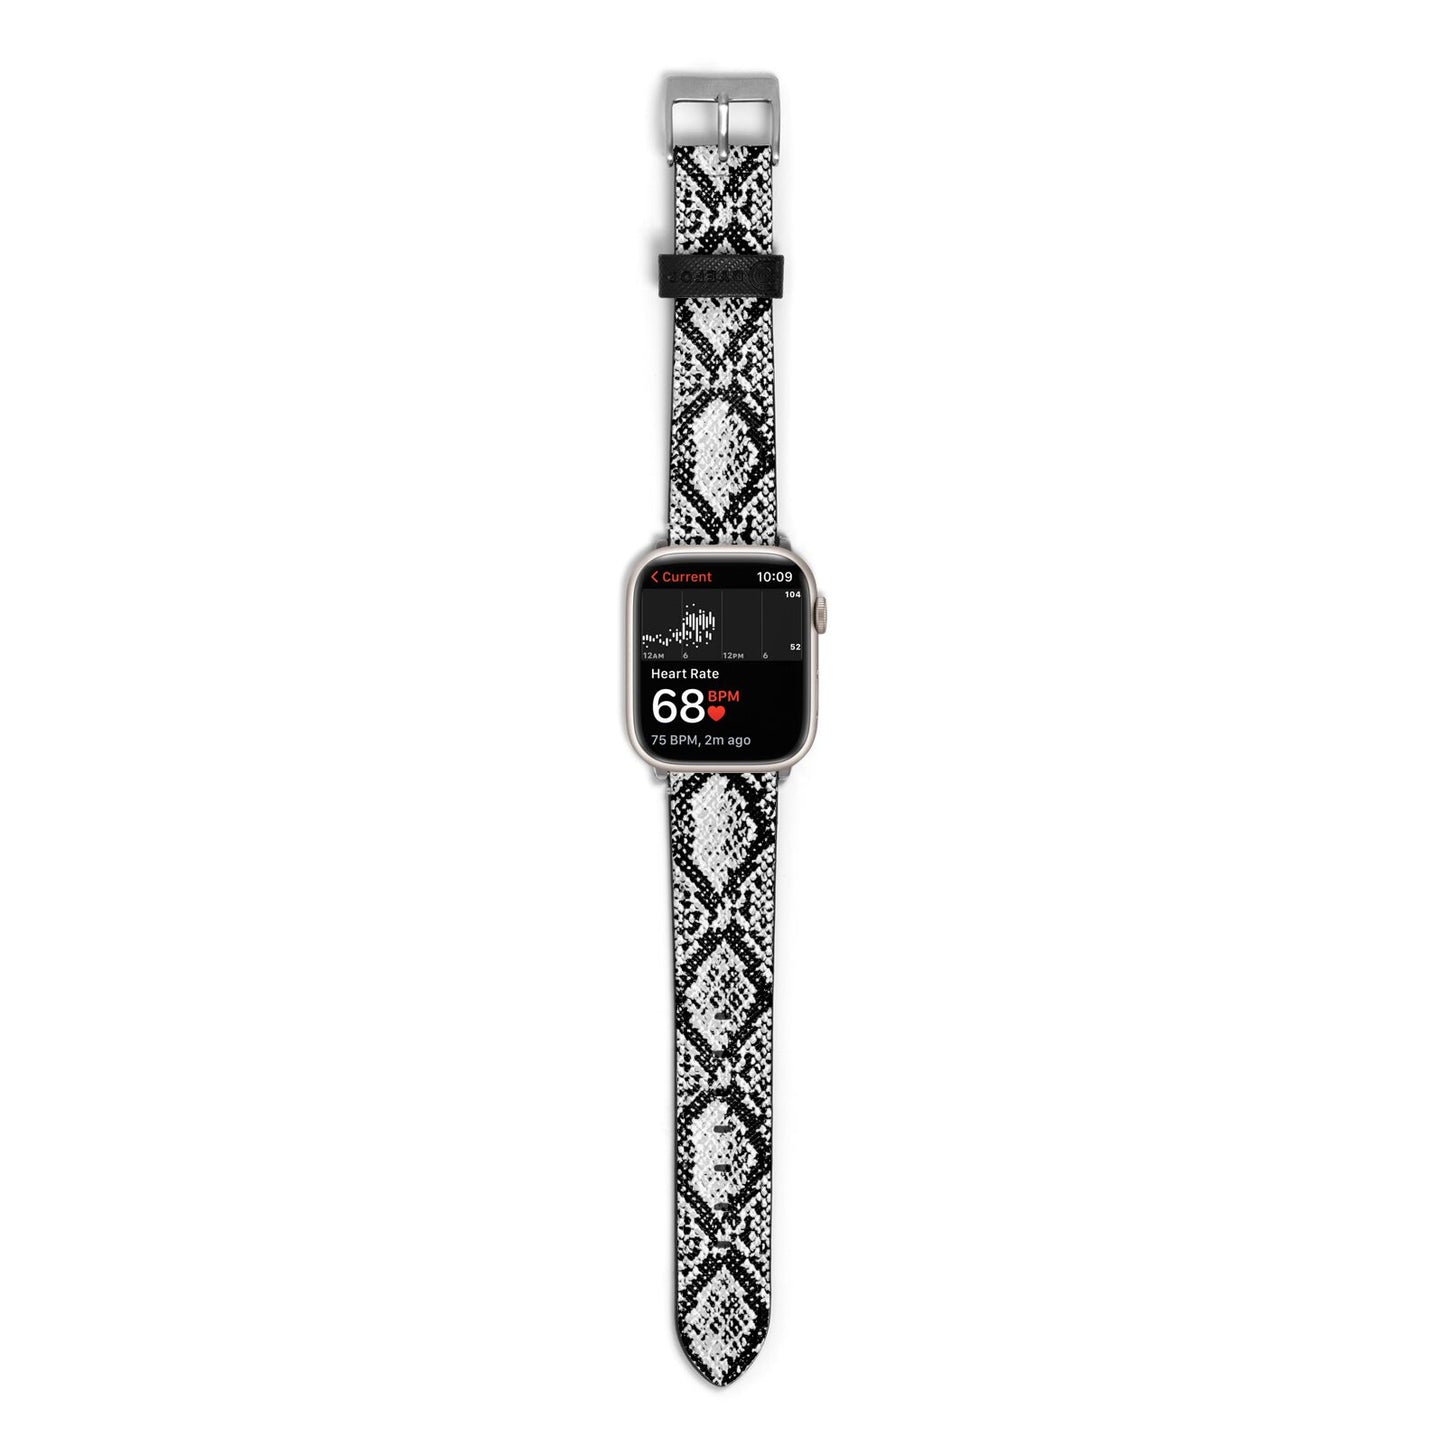 Black Snakeskin Apple Watch Strap Size 38mm with Silver Hardware